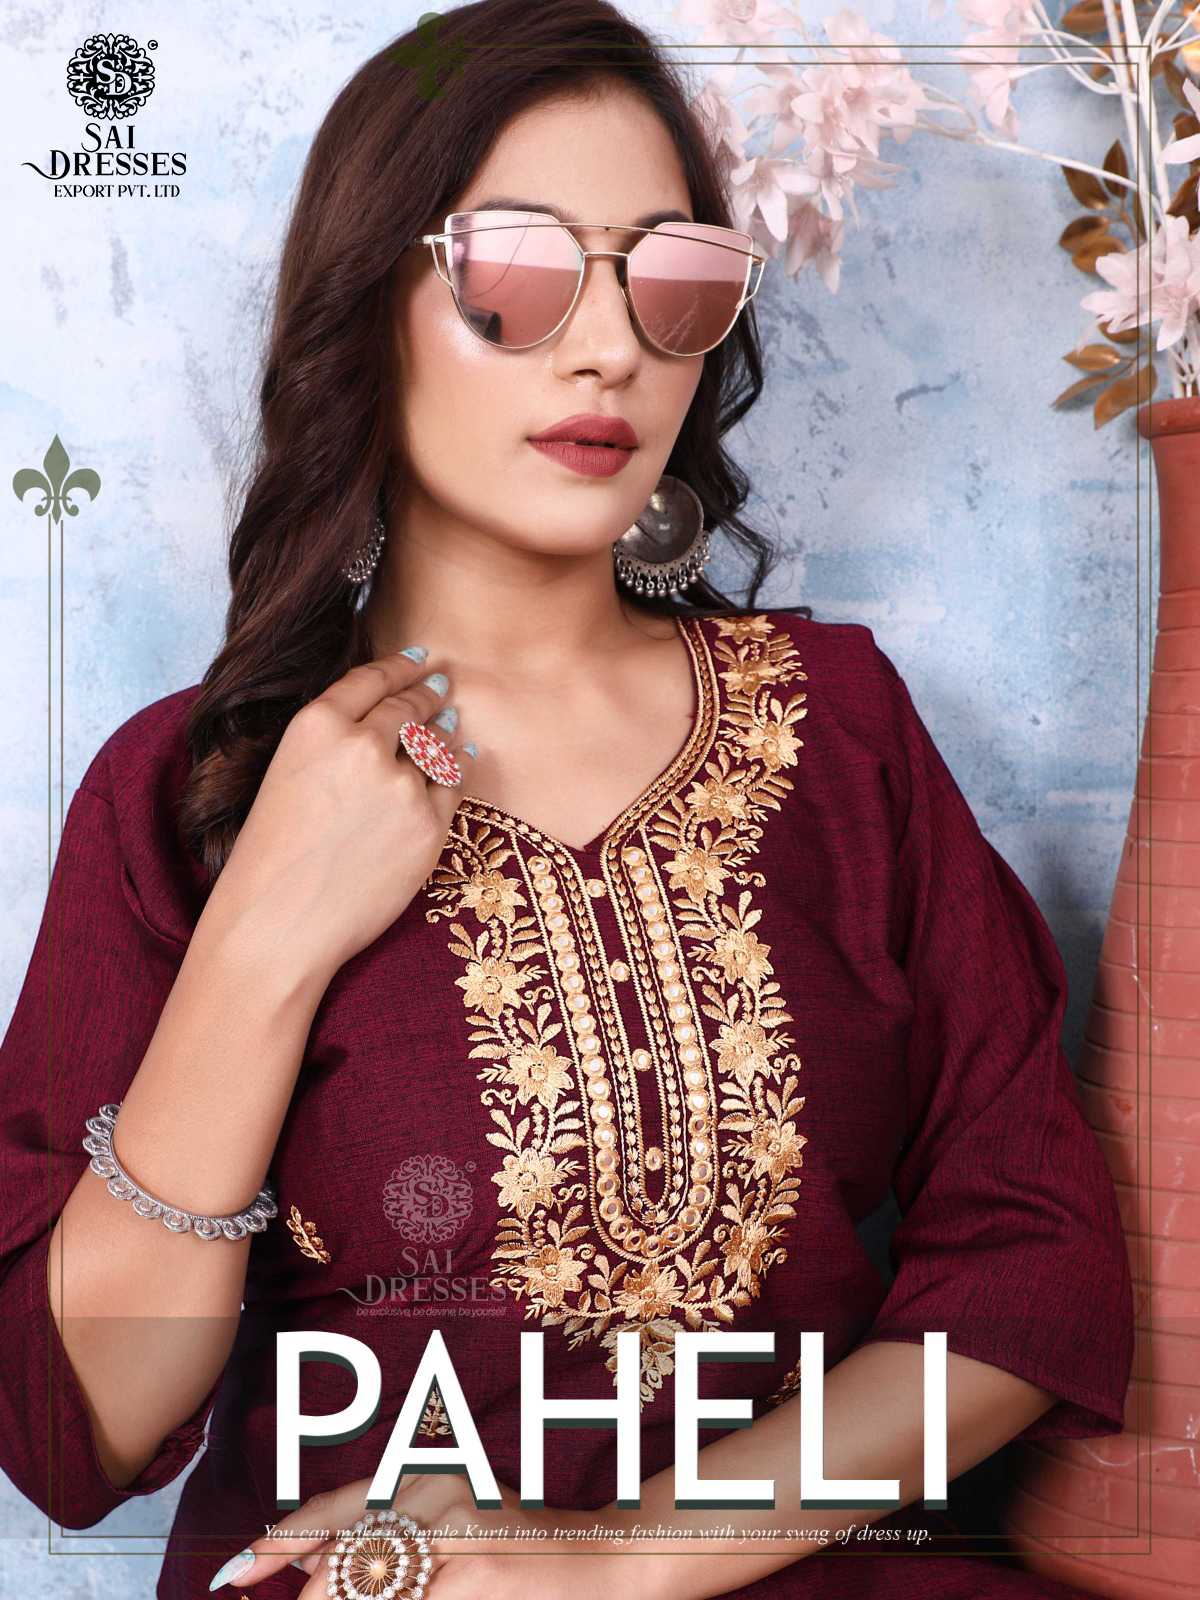 SAI DRESSES PRESENT PAHELI READY TO DAILY WEAR STRAIGHT KURTI WITH PANT IN WHOLESALE RATE IN SURAT